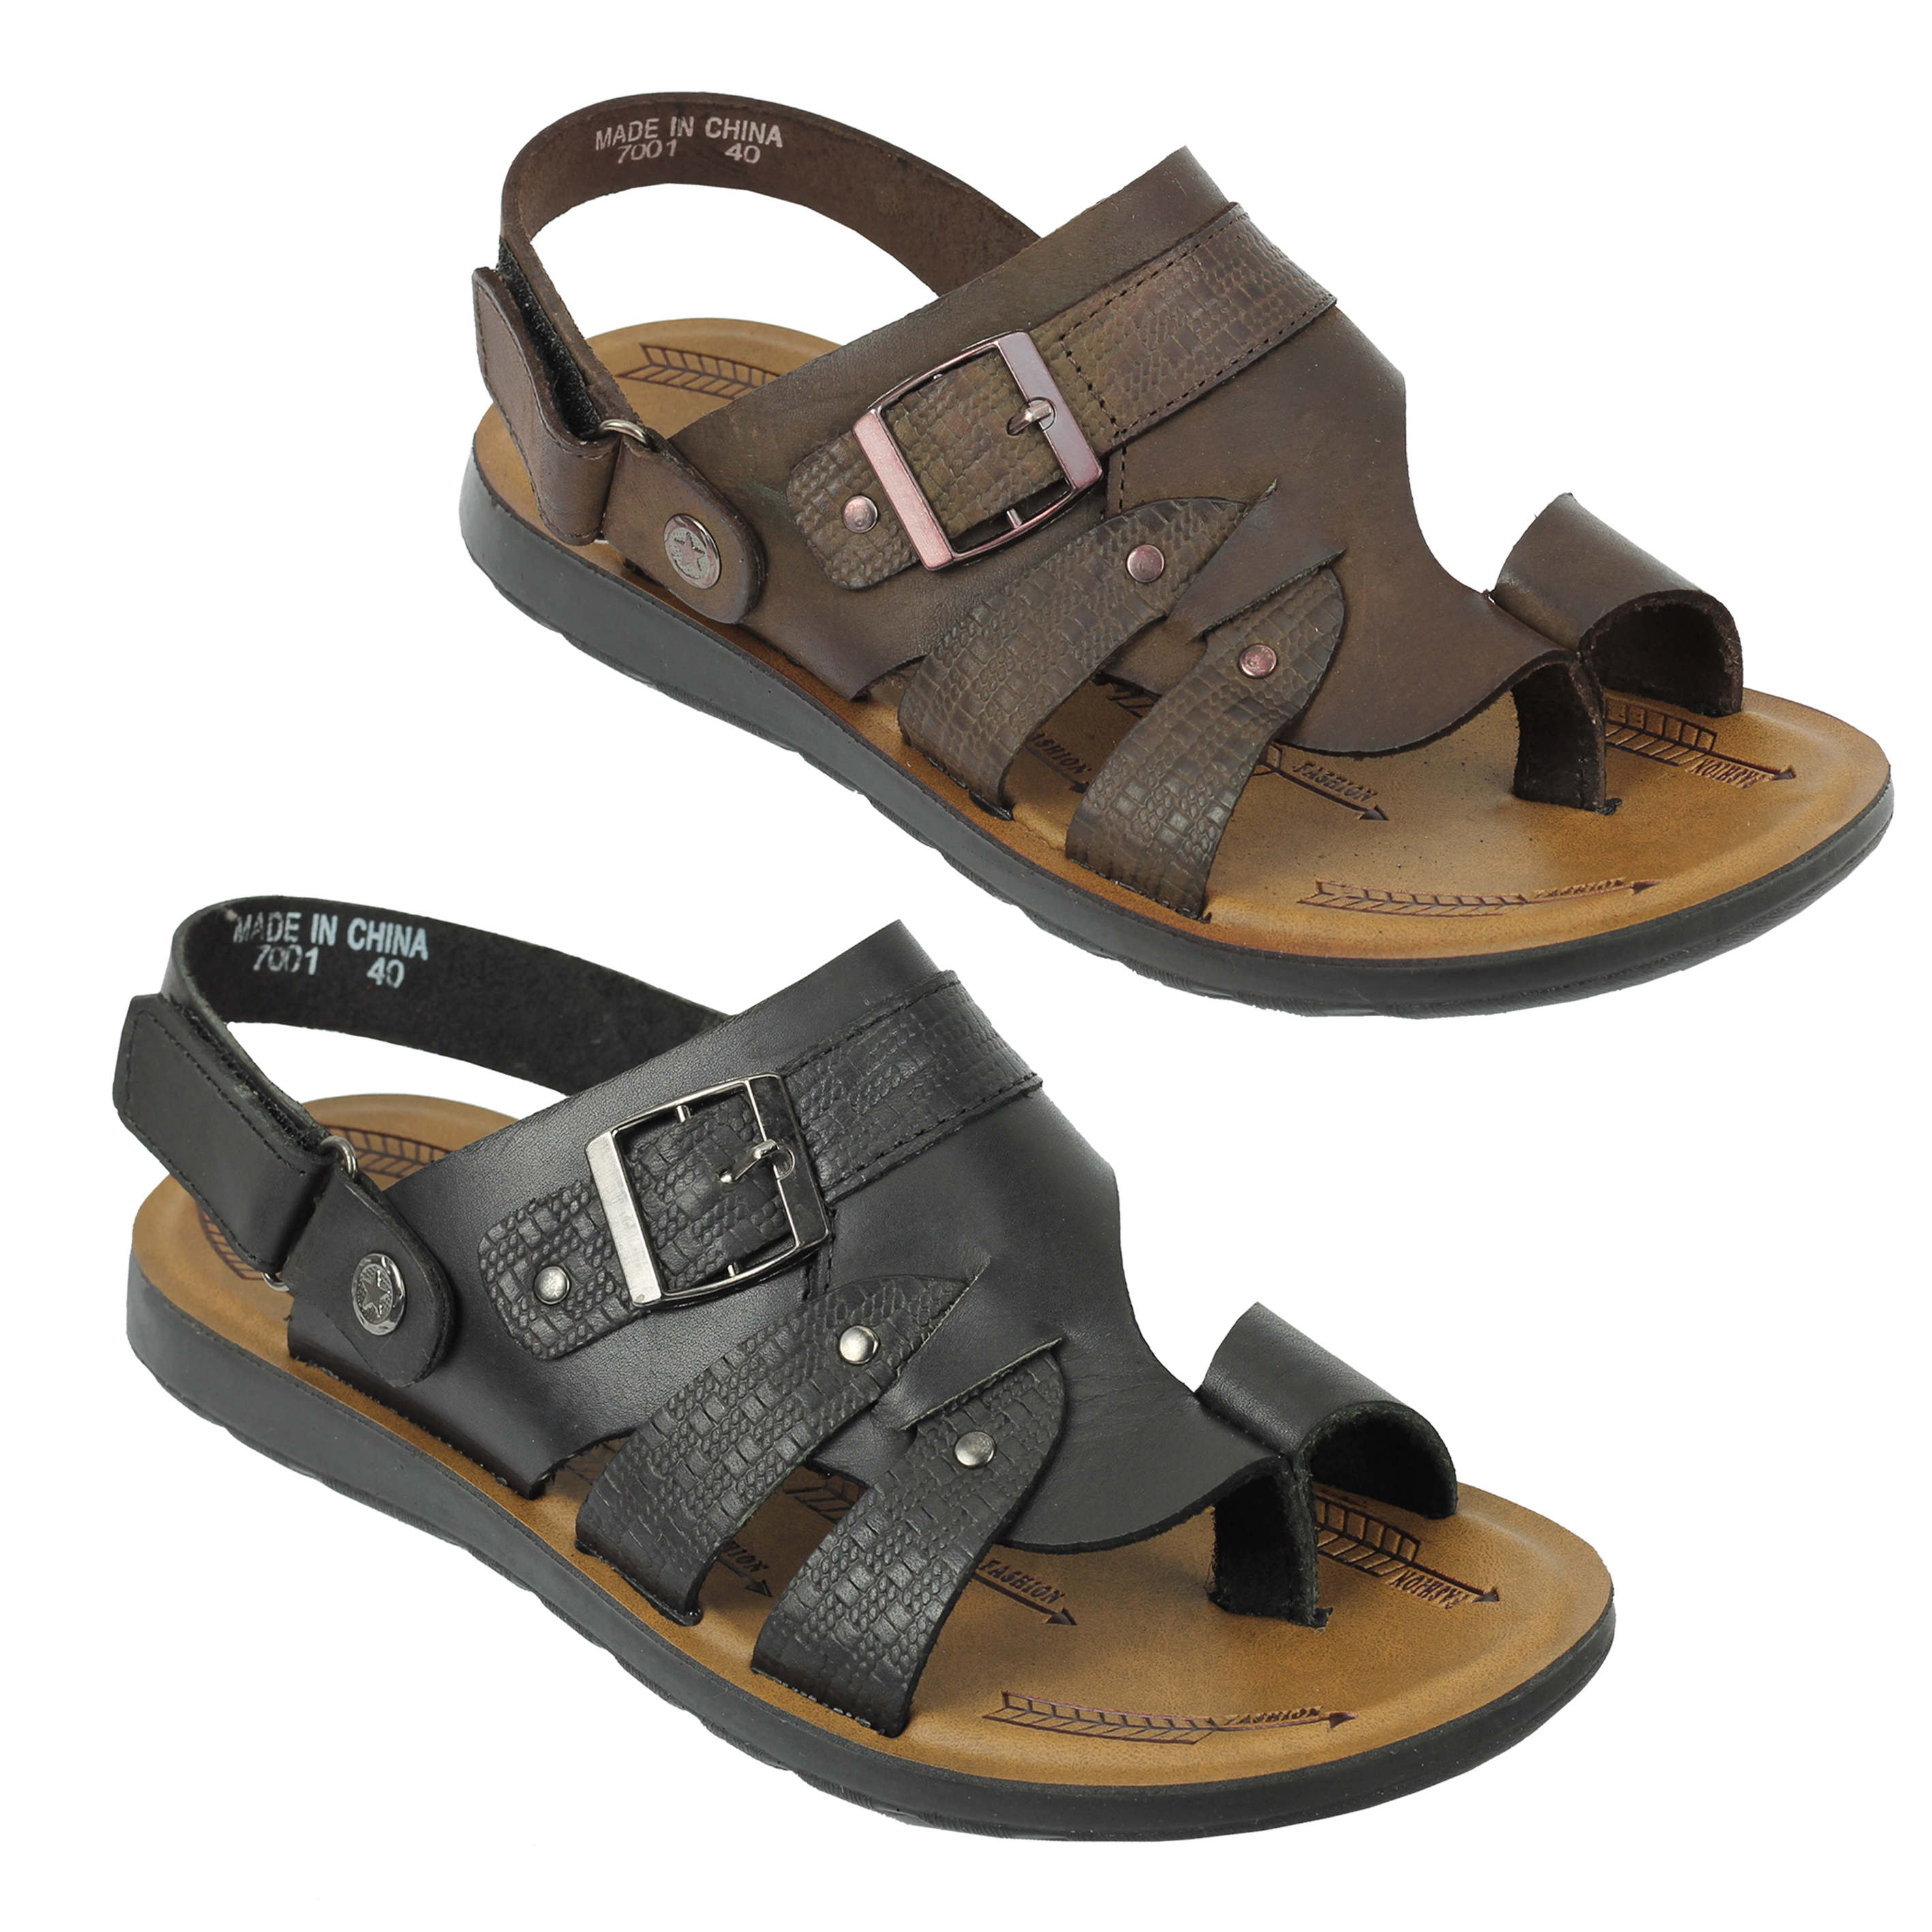 mens sandals with back straps